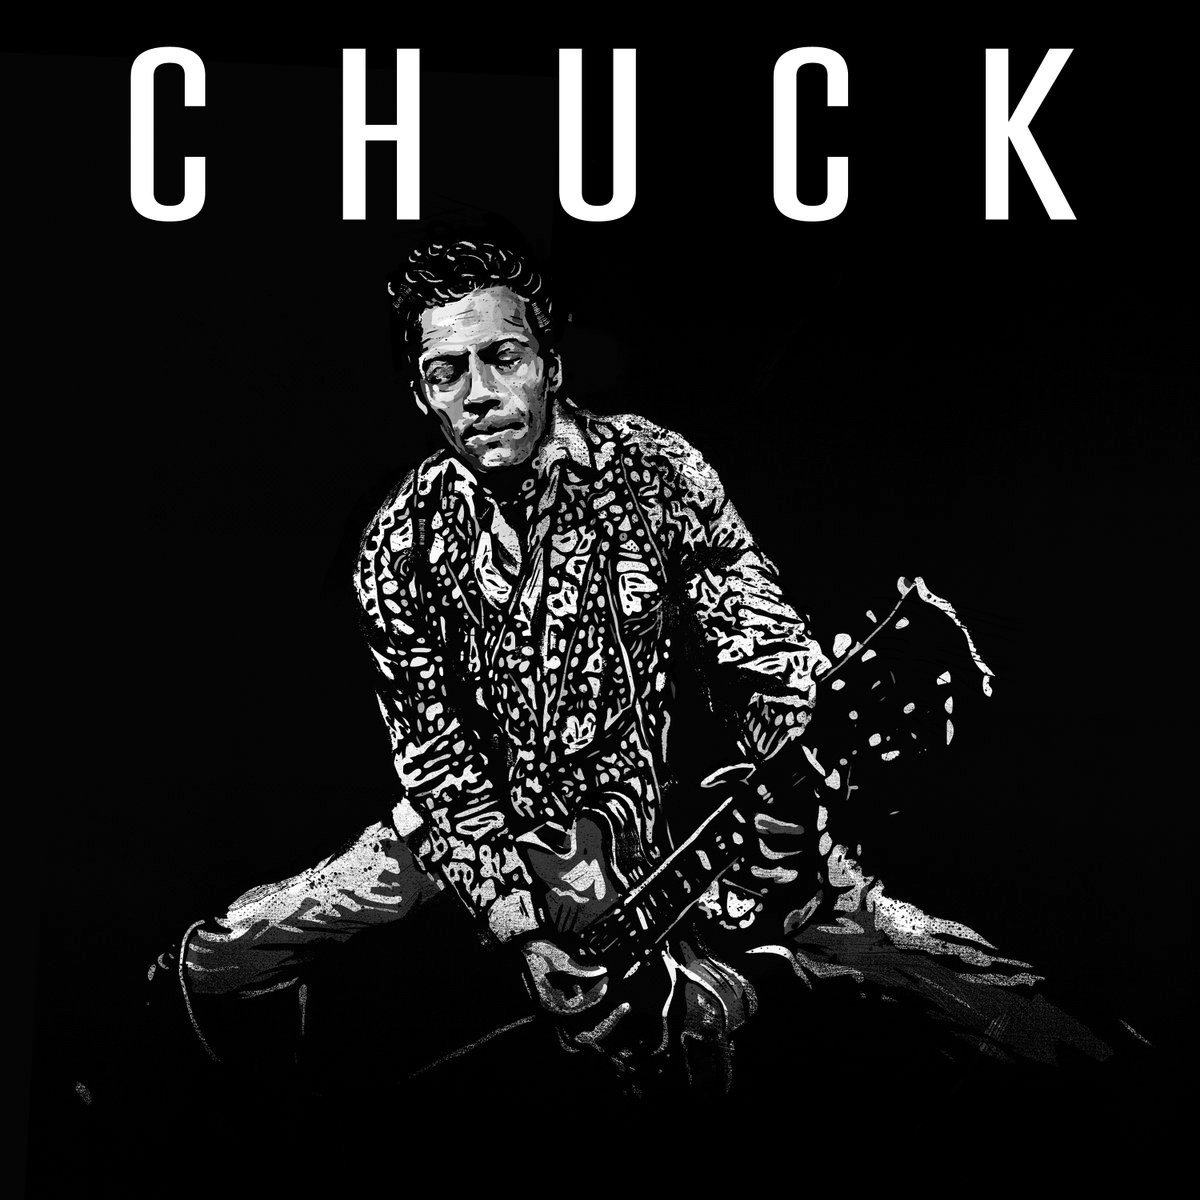 Chuck Berry – Chuck, The Final Album From the Rock and Roll Icon!